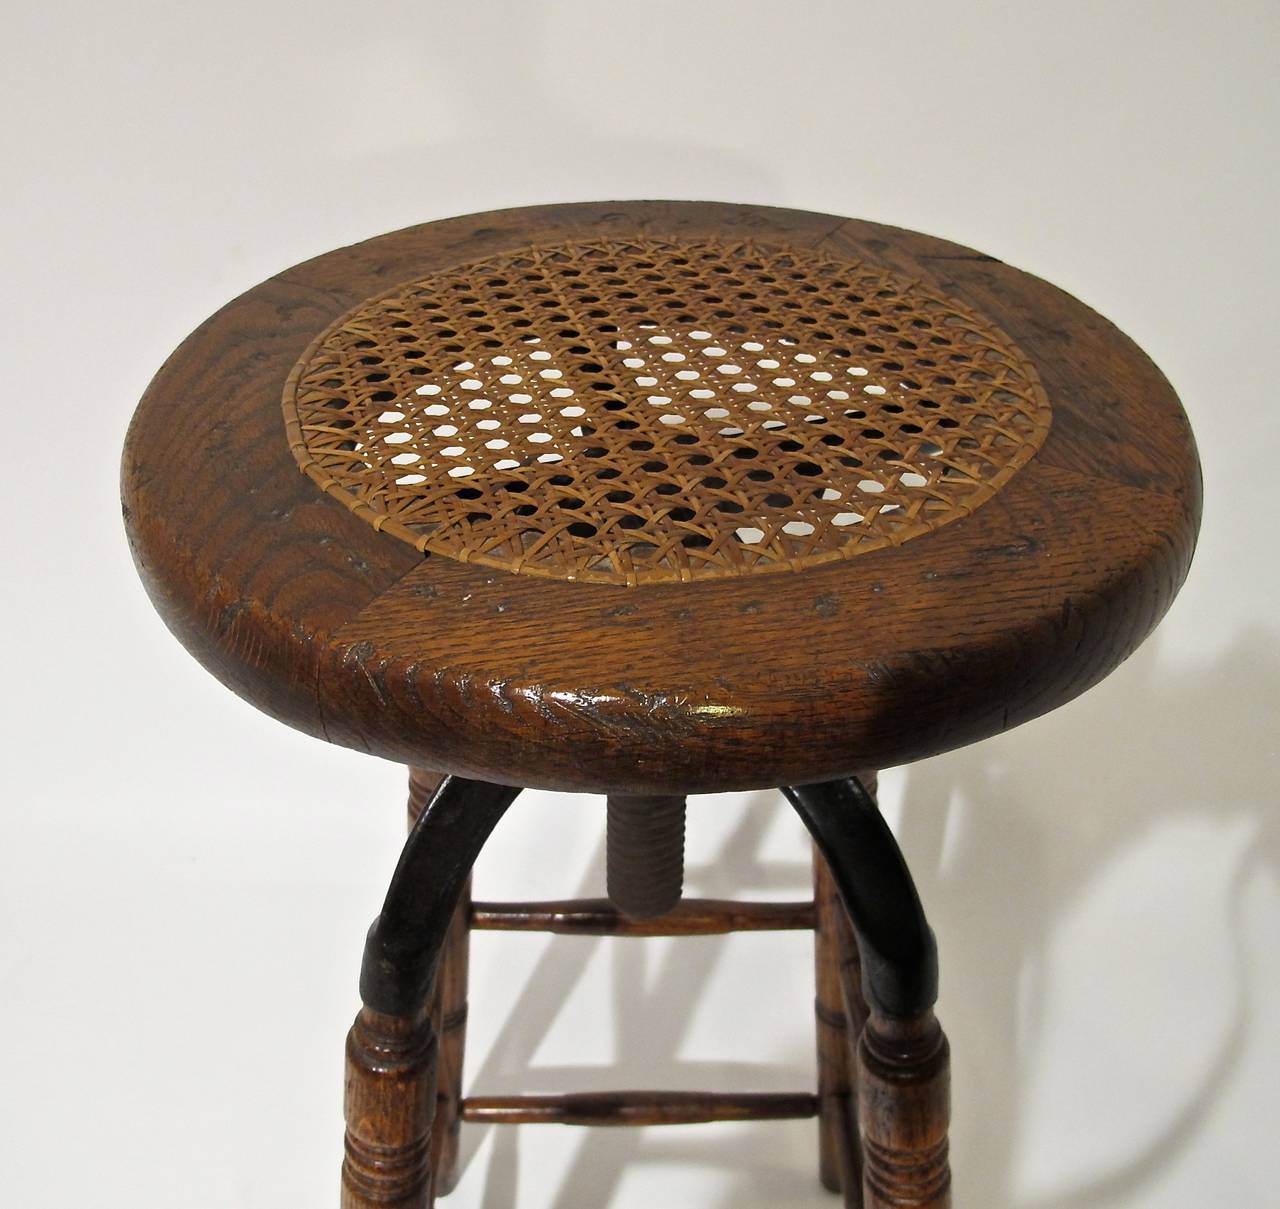 19th Century Oak and Iron Industrial Stool with Cane Seat